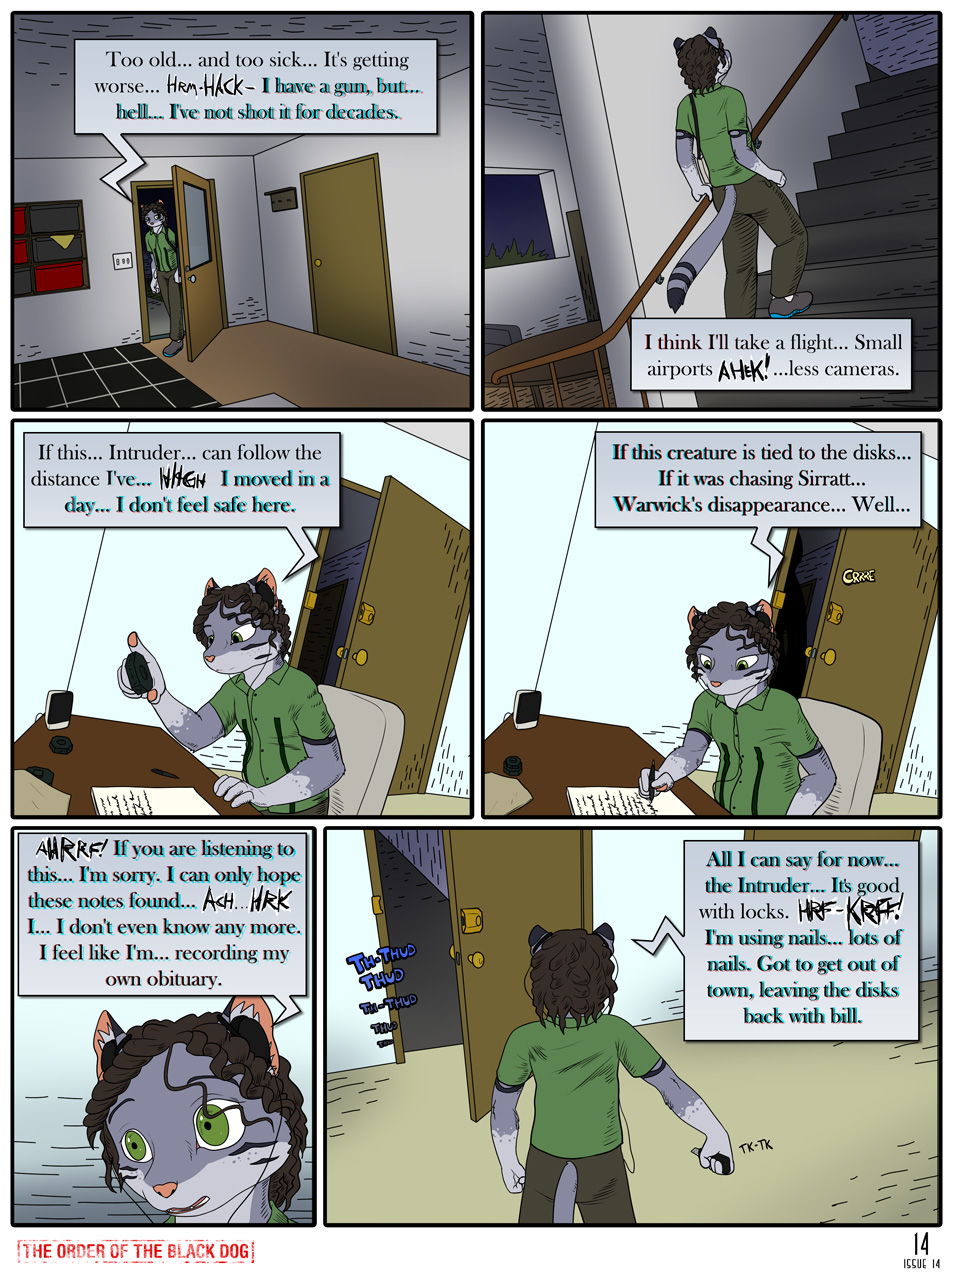 Issue 14, Page 14